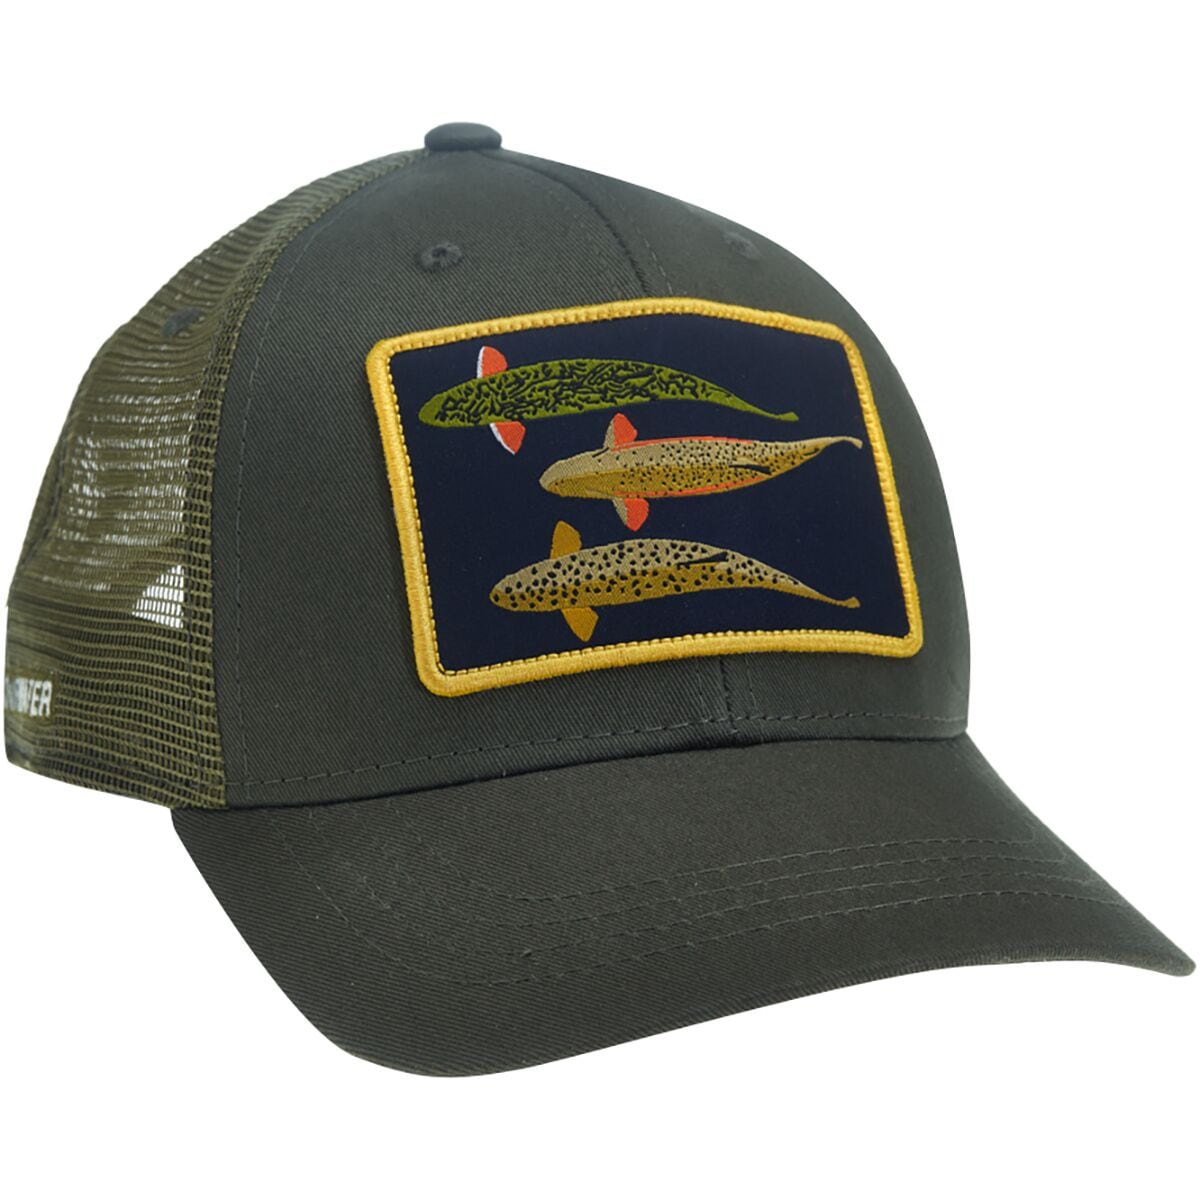 Rep Your Water Silhouette Trio Standard Fit Trucker Hat